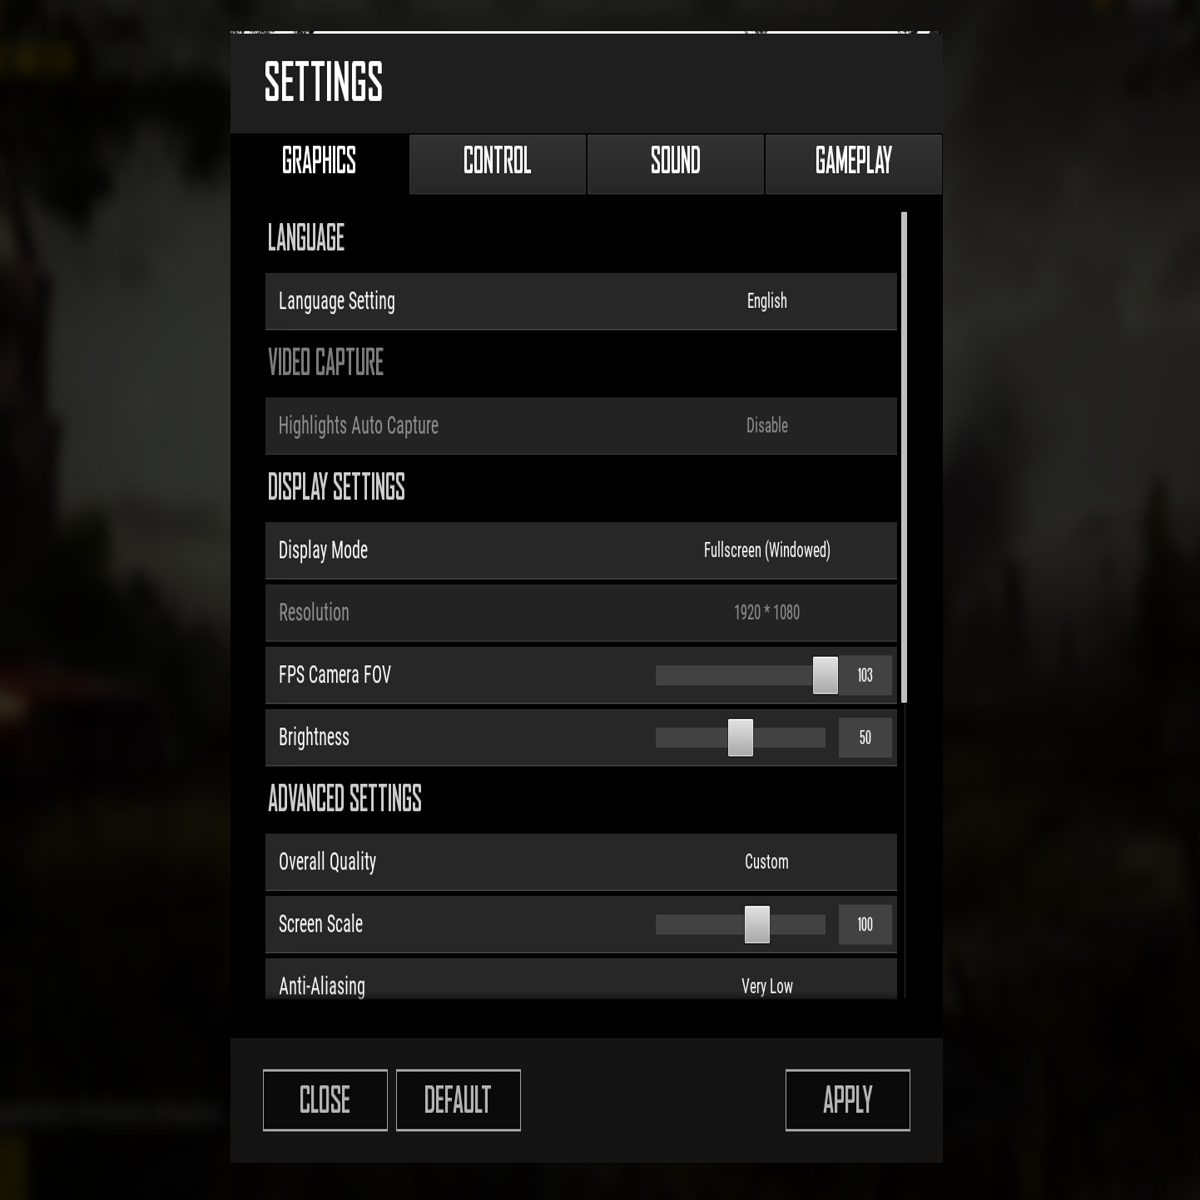 Best Settings Guide for GameLoop